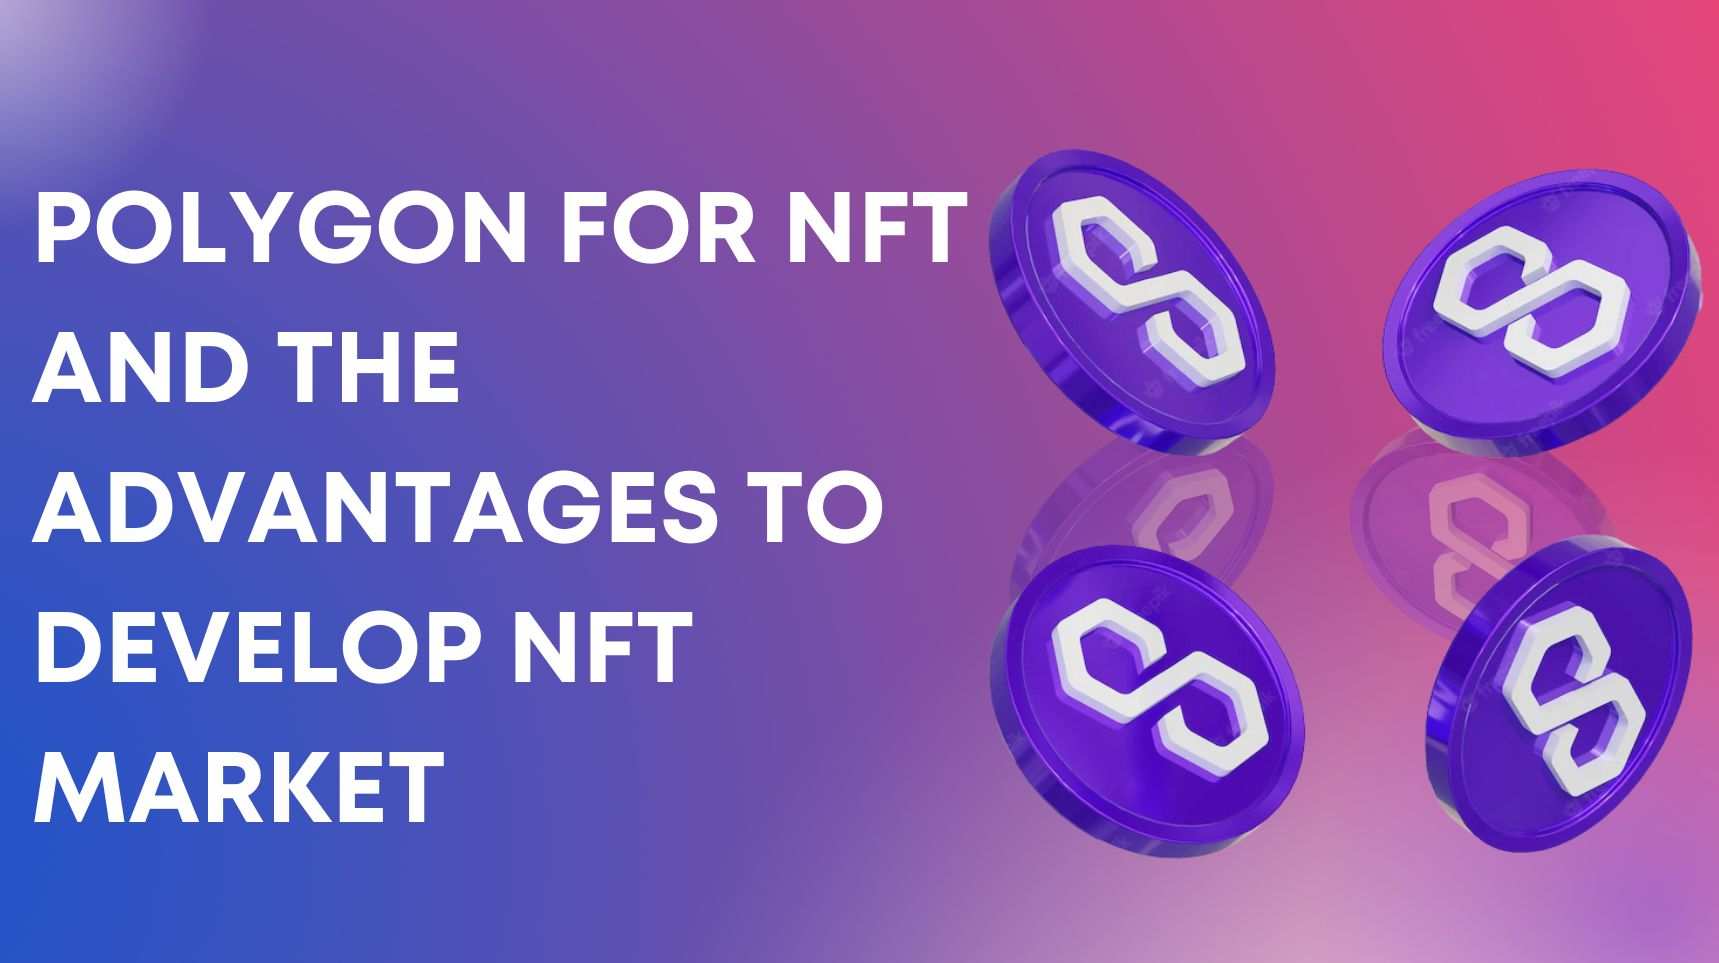 Polygon For NFT and The Advantages To Develop NFT Market